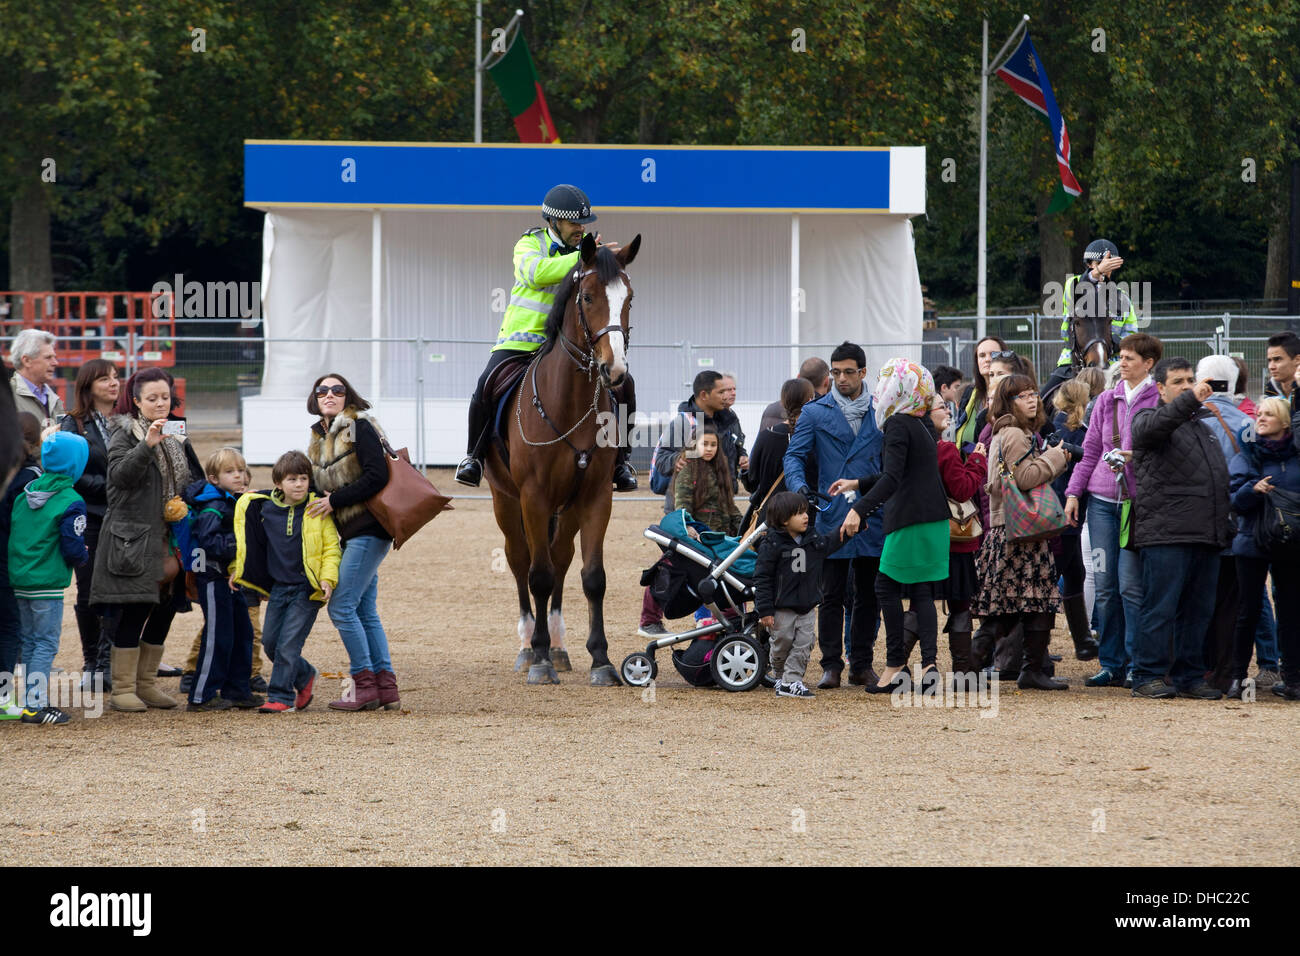 Mounted Police Parting the crowds at Horseguards Parade London Stock Photo